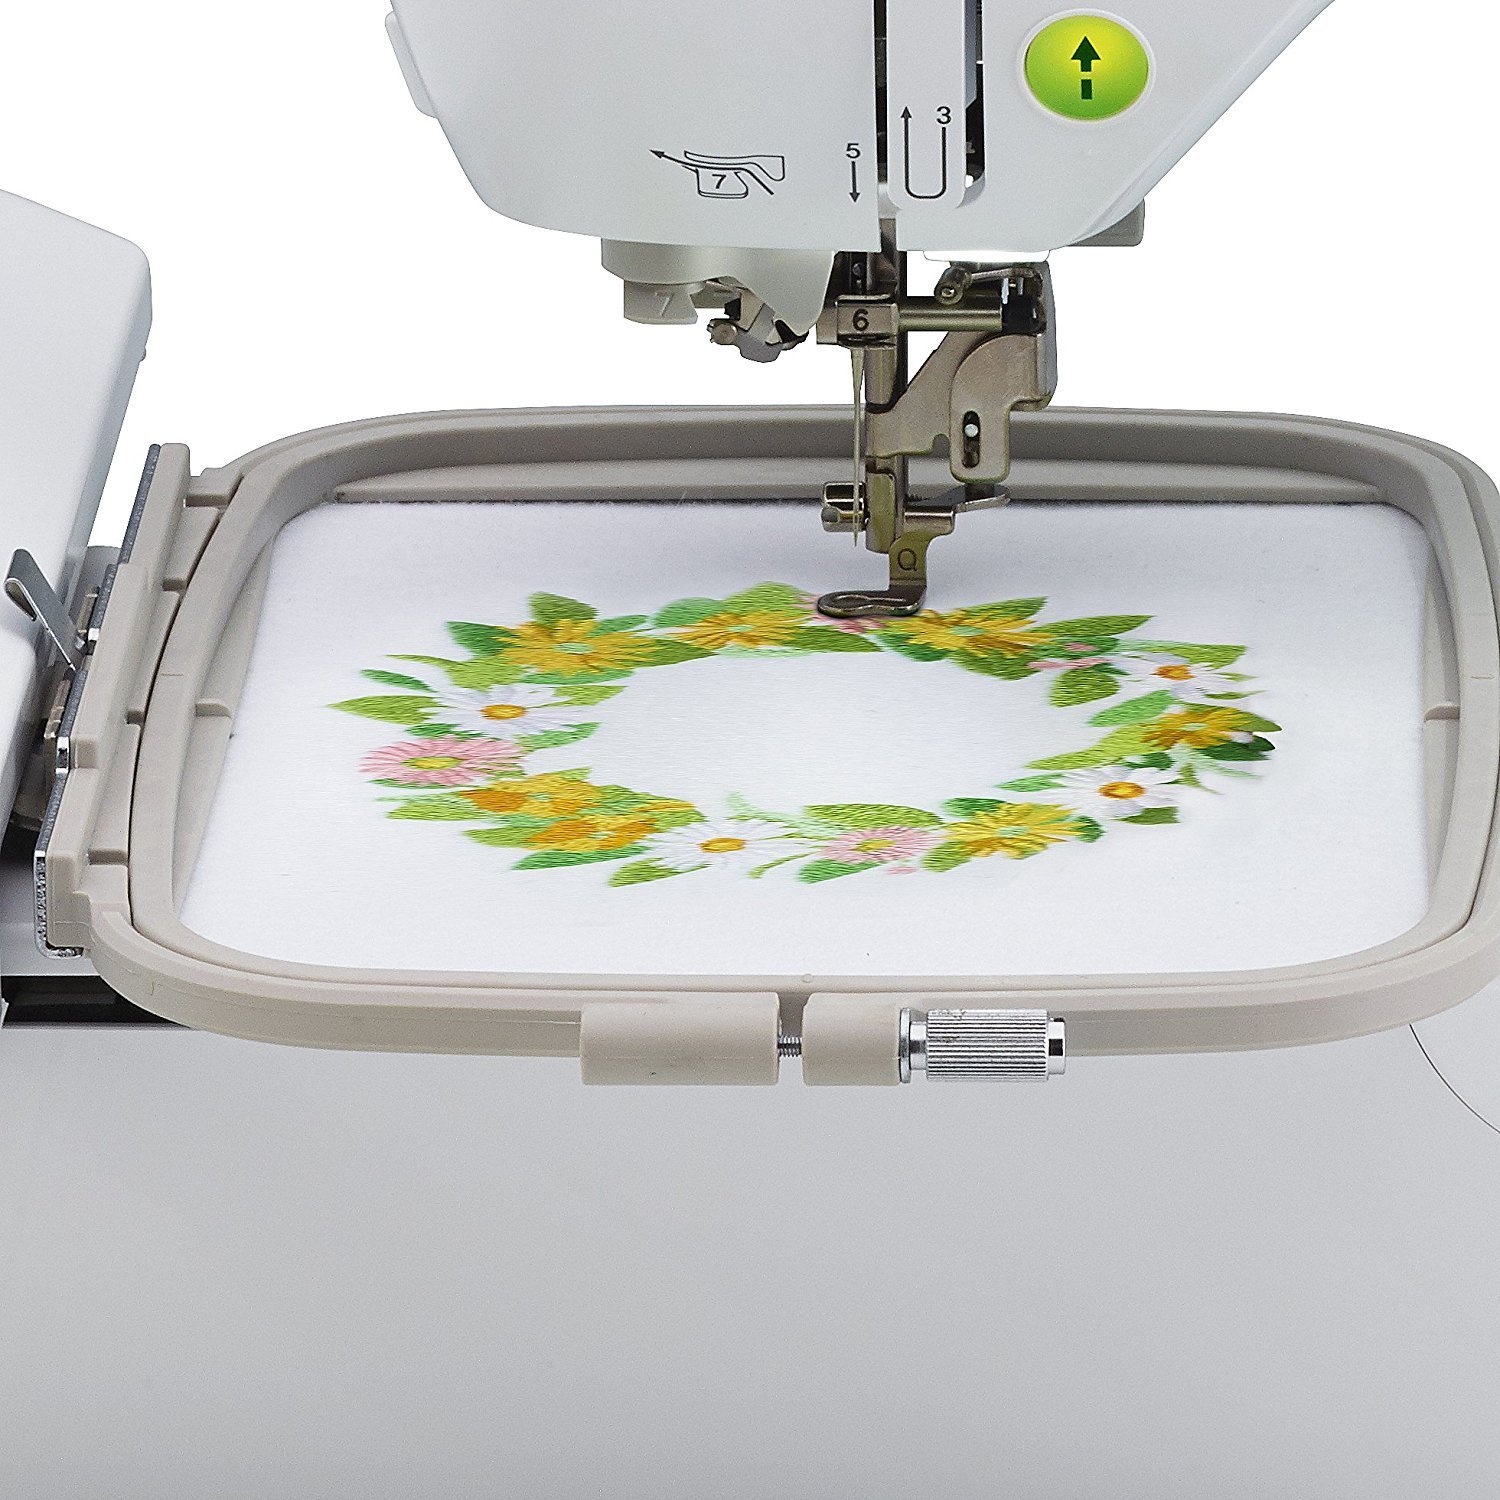 Brother PE800 5”x7” Embroidery Machine